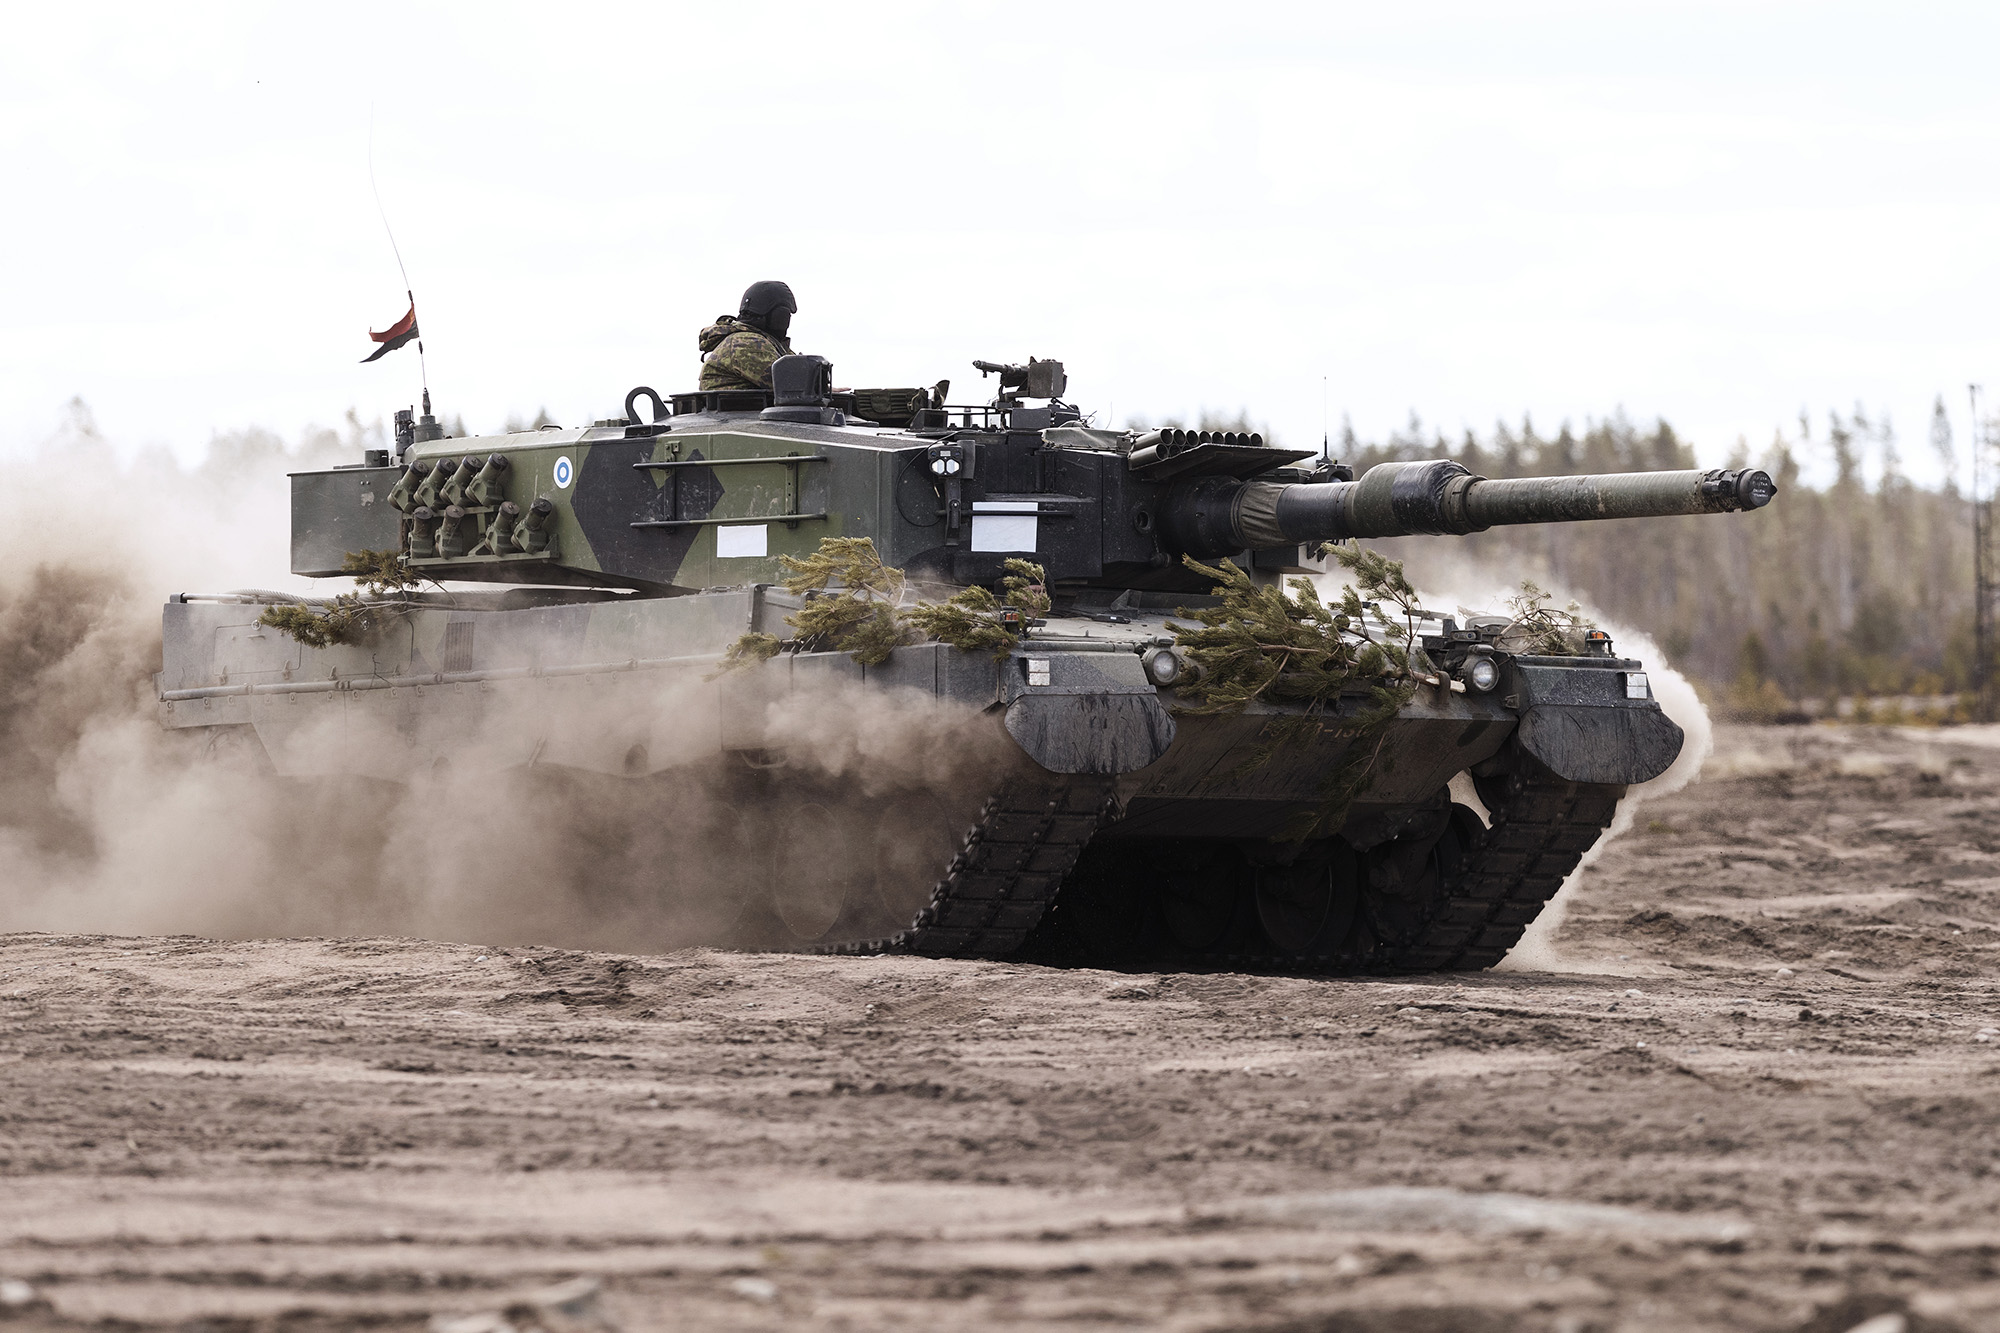 A Leopard 2A6 battle tank during the Finnish Army Arrow 22 training exercise, with participating forces from the U.K., Latvia, U.S. and Estonia, in Niinisalo, Finland, on May 4.